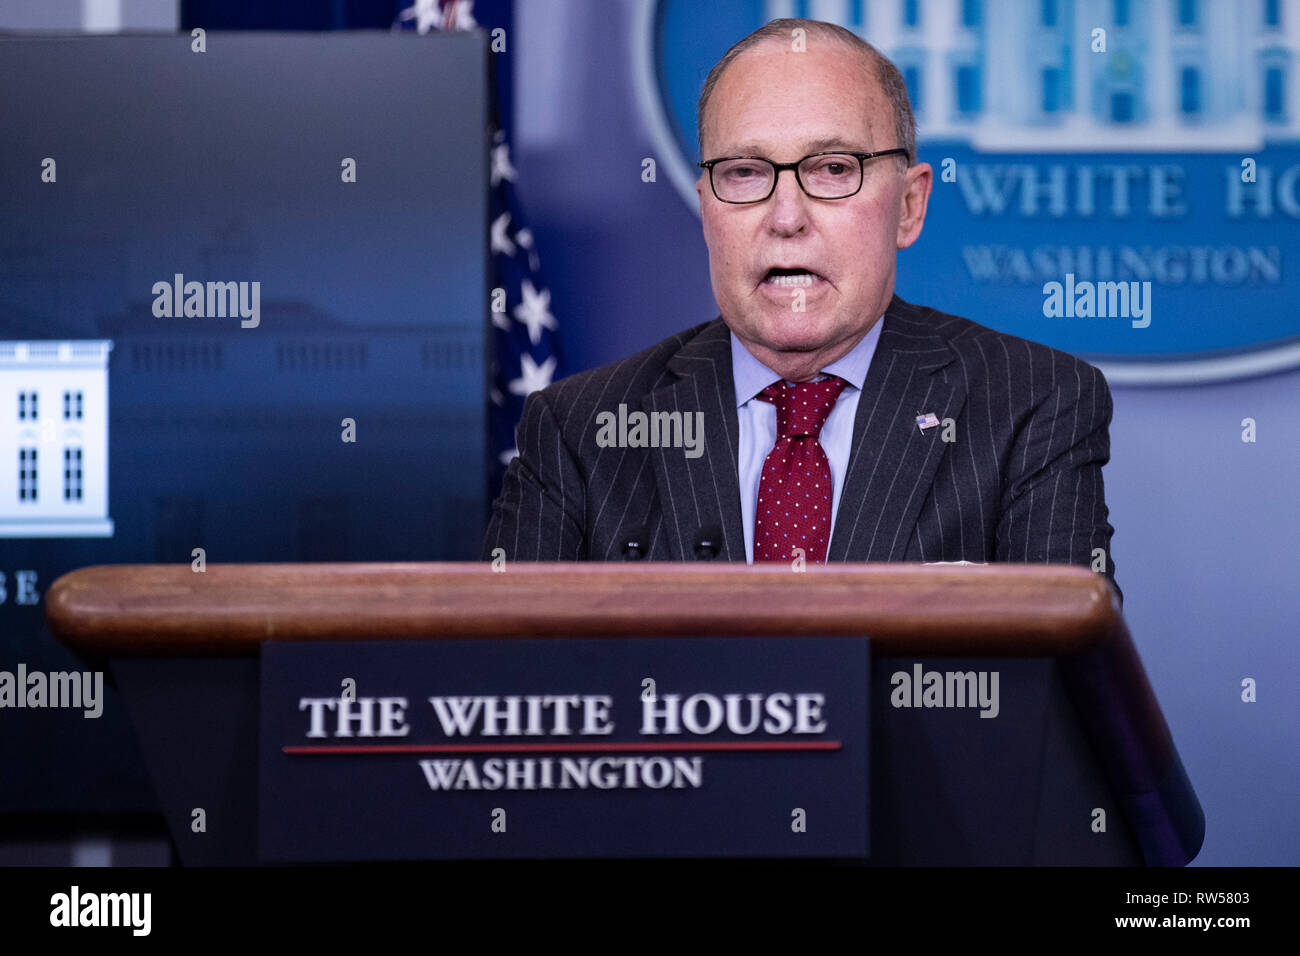 Director of the United States National Economic Council Larry Kudlow takes questions from reporters at the White House in Washington, DC on January 28, 2019. The White House has announced new economic sanctions against Venezuela Stock Photo